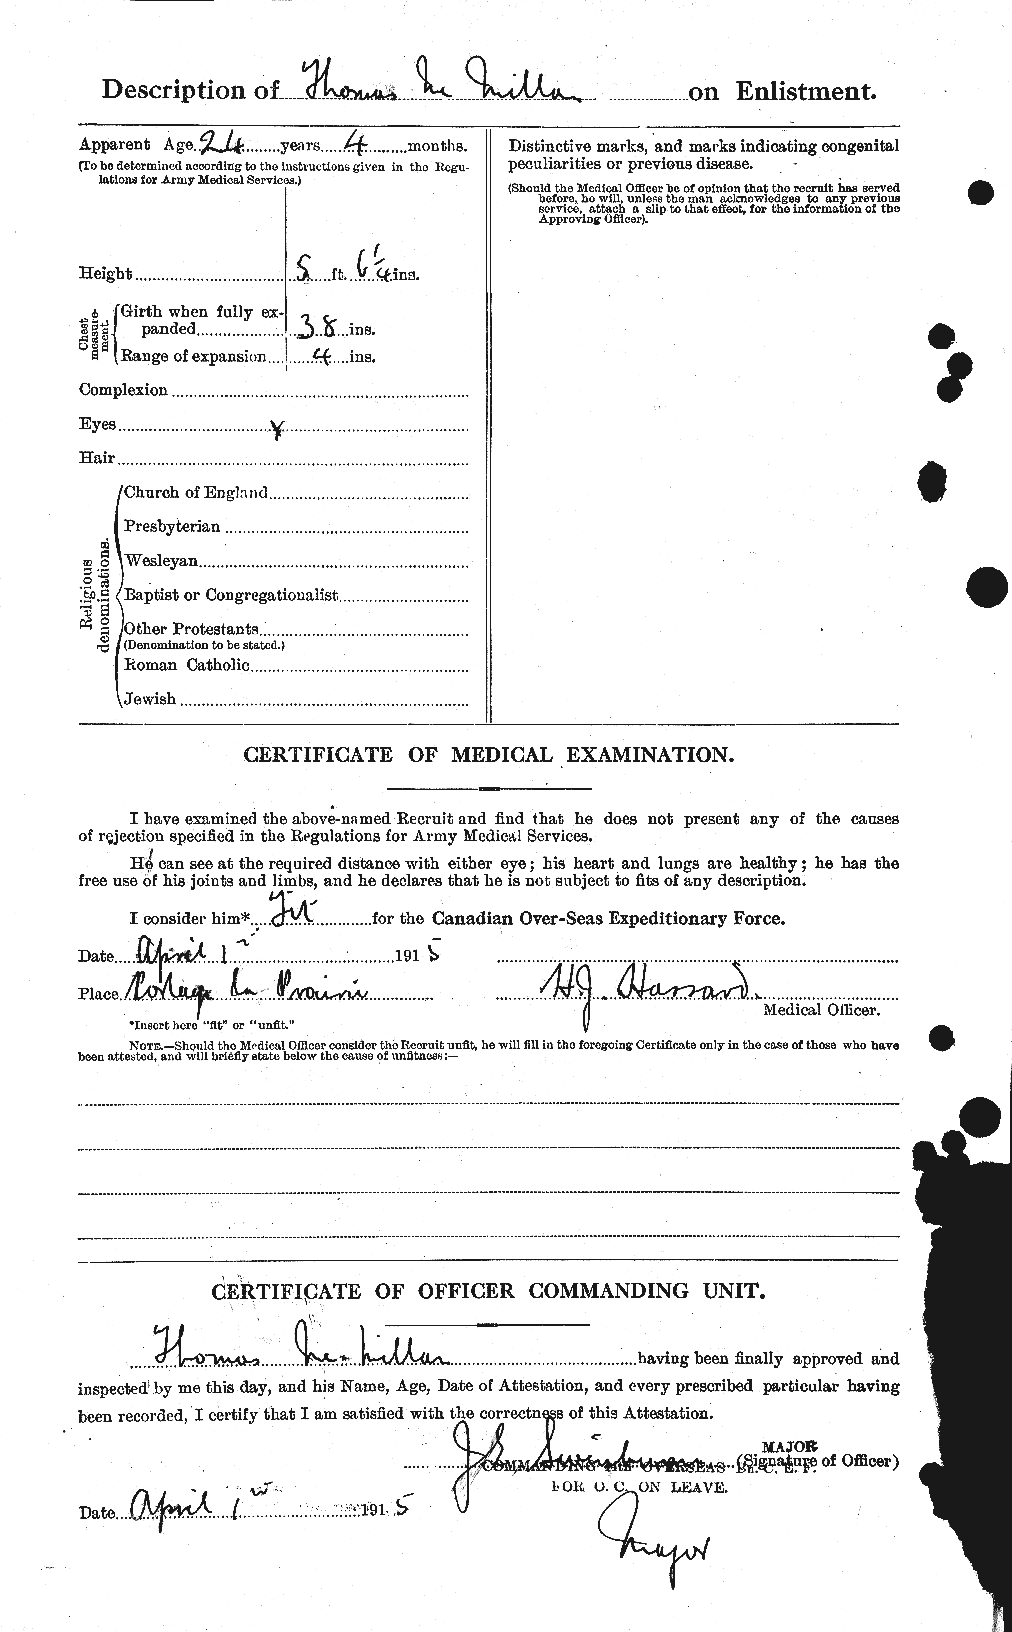 Personnel Records of the First World War - CEF 536962b